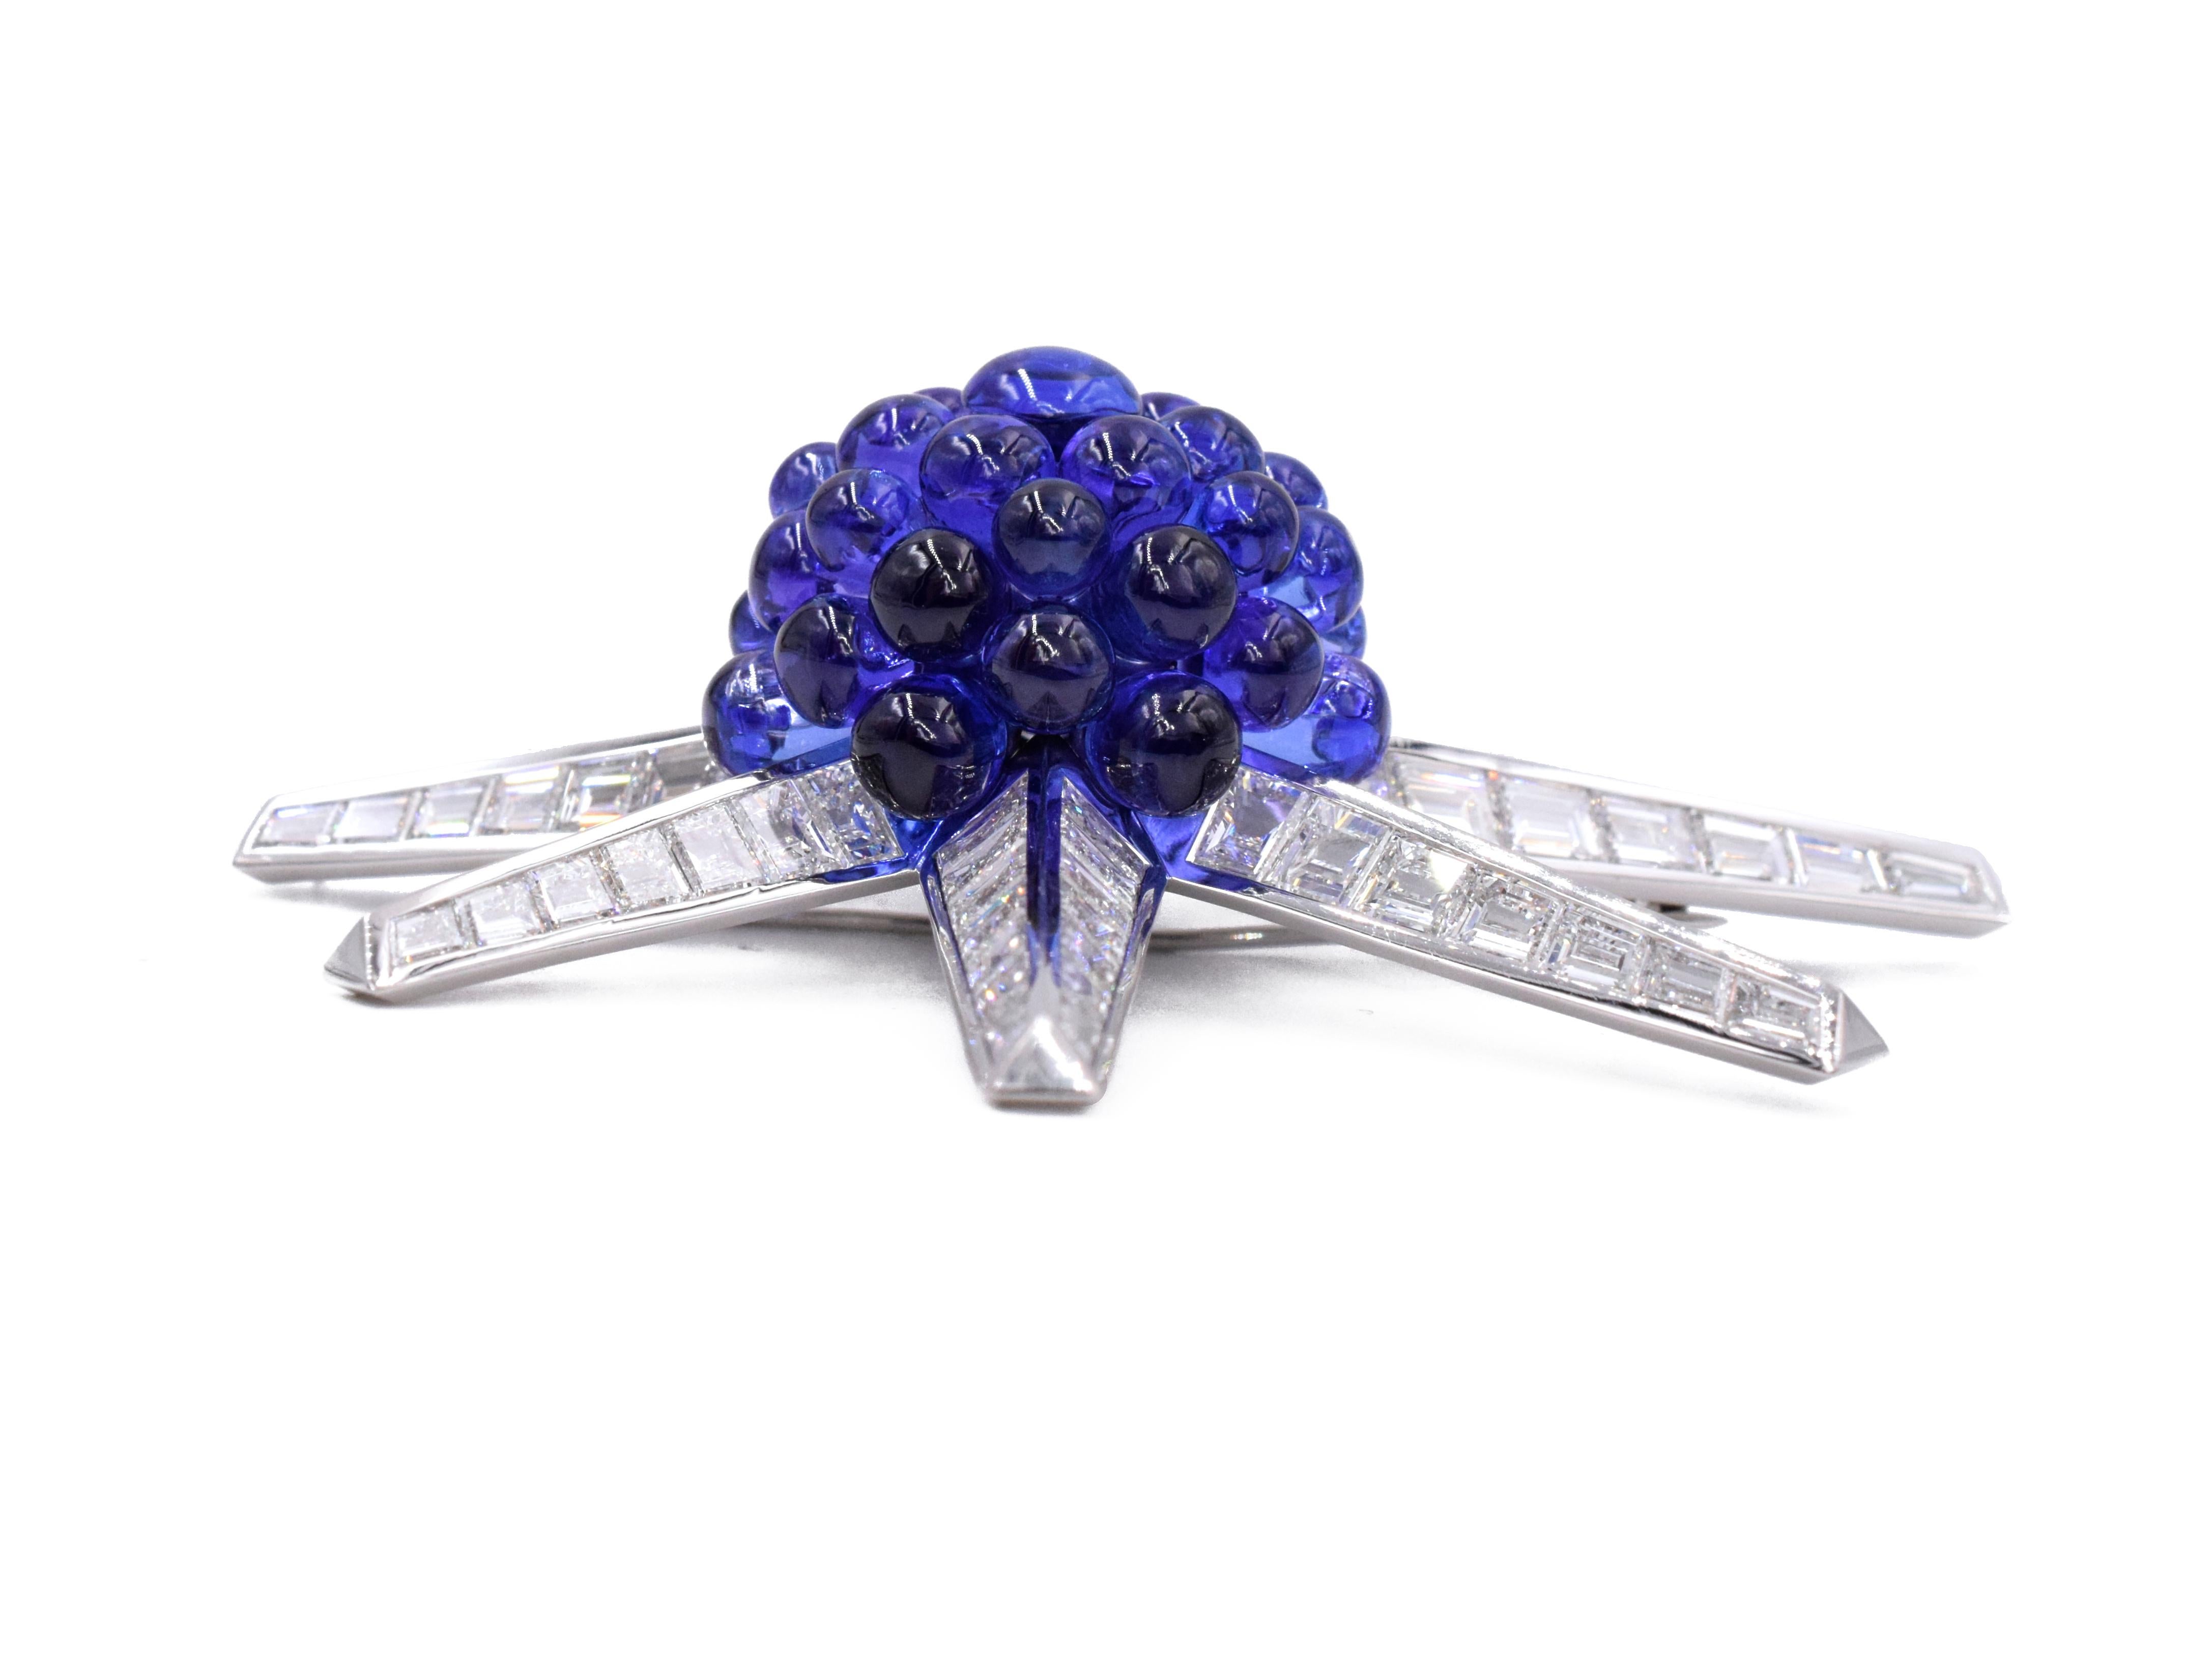 Tiffany & Co. Tanzanite and Diamond Brooch
Designed as a star, the center set with a cluster of tanzanite cabochons extending channel-set tapered baguette-cut diamond rays, 2 3/4 ins., mounted in platinum.
The brooch has approximately 21 carats fine